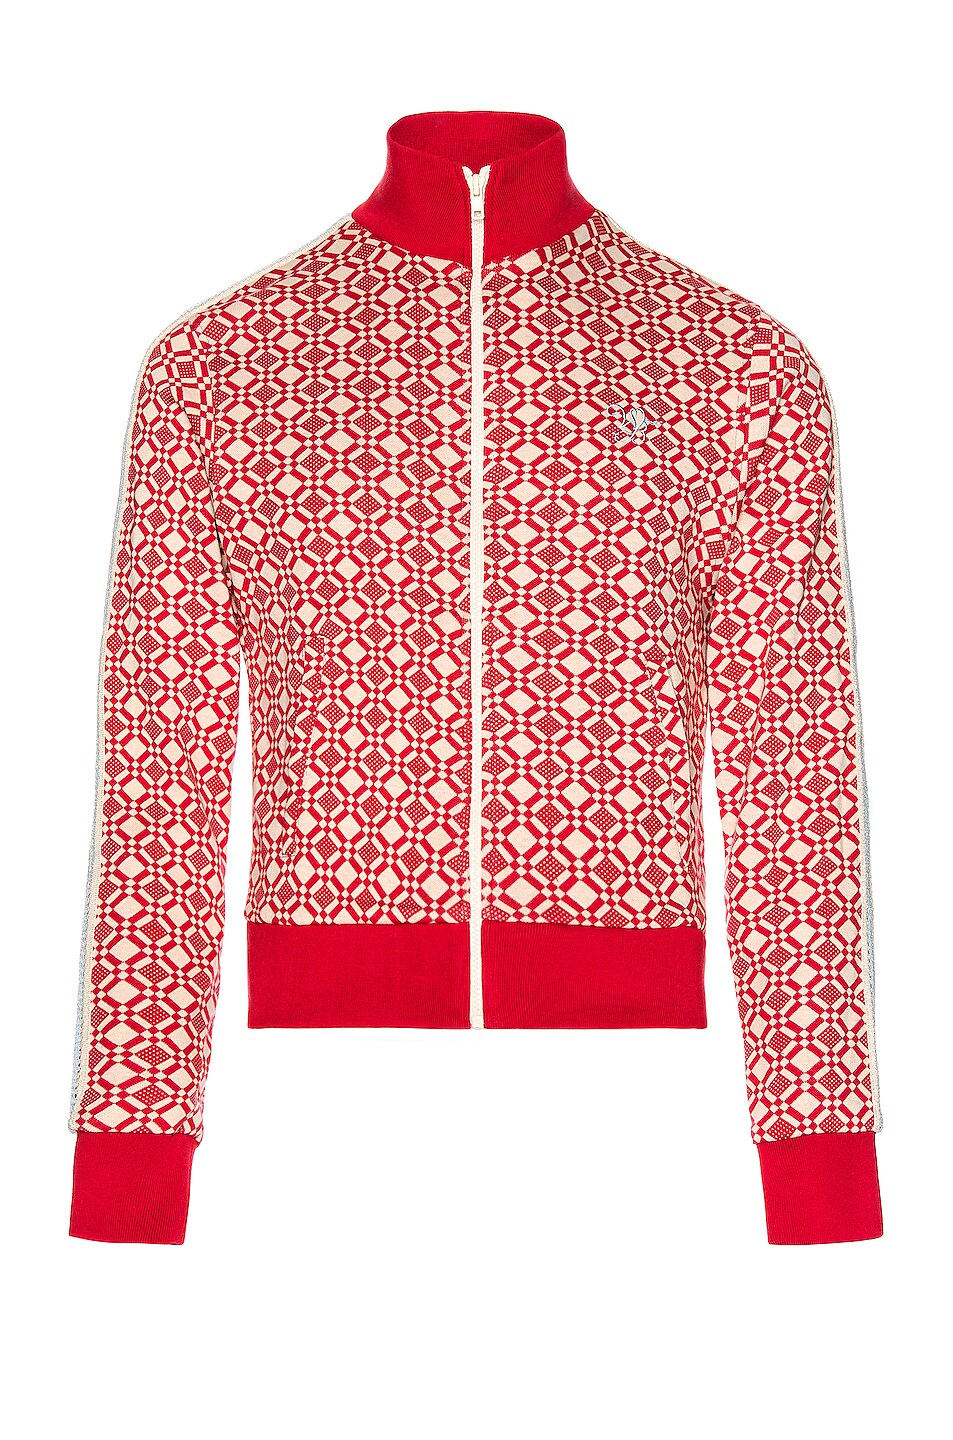 Image 1 of Wales Bonner Power Track Top in Jacquard